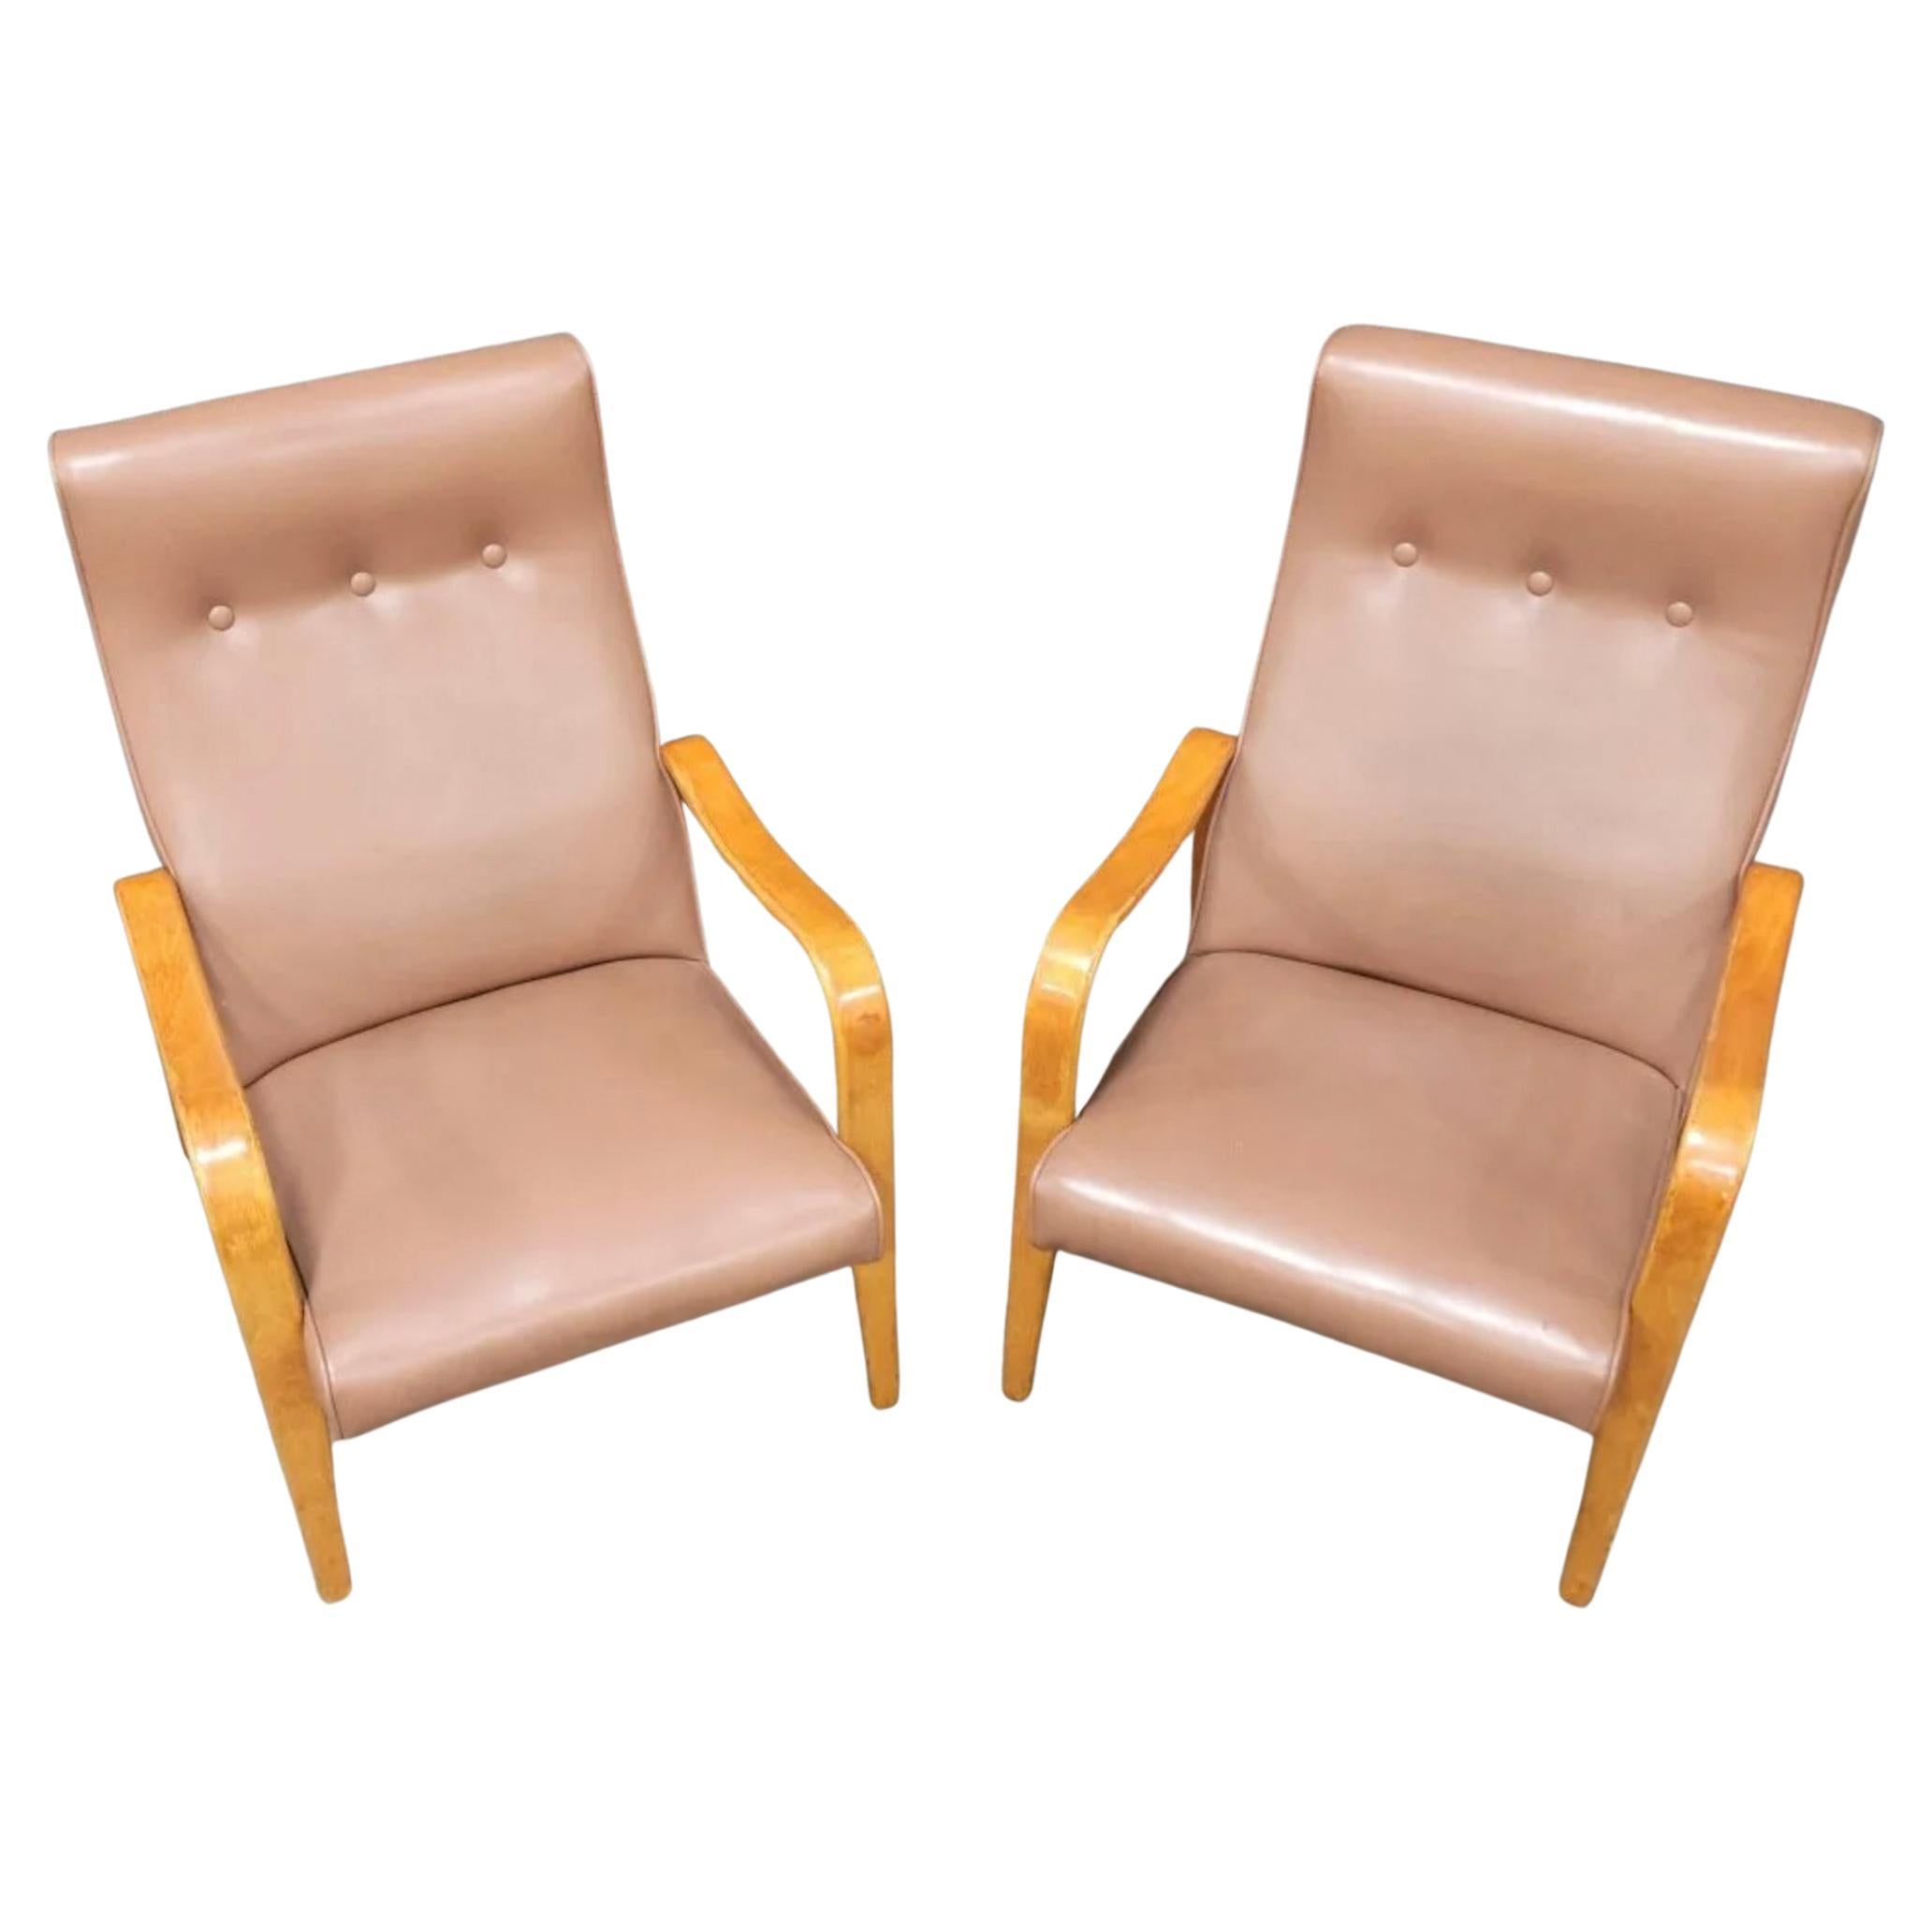 Pair of Mid-Century Modern Thonet bentwood birch lounge arm chairs. Has original medium pastel Rose color vinyl upholstery. Great vintage condition. Timeless chair design by Thonet. Curved birch bentwood arms. Chairs sold as a set of (2). Located in